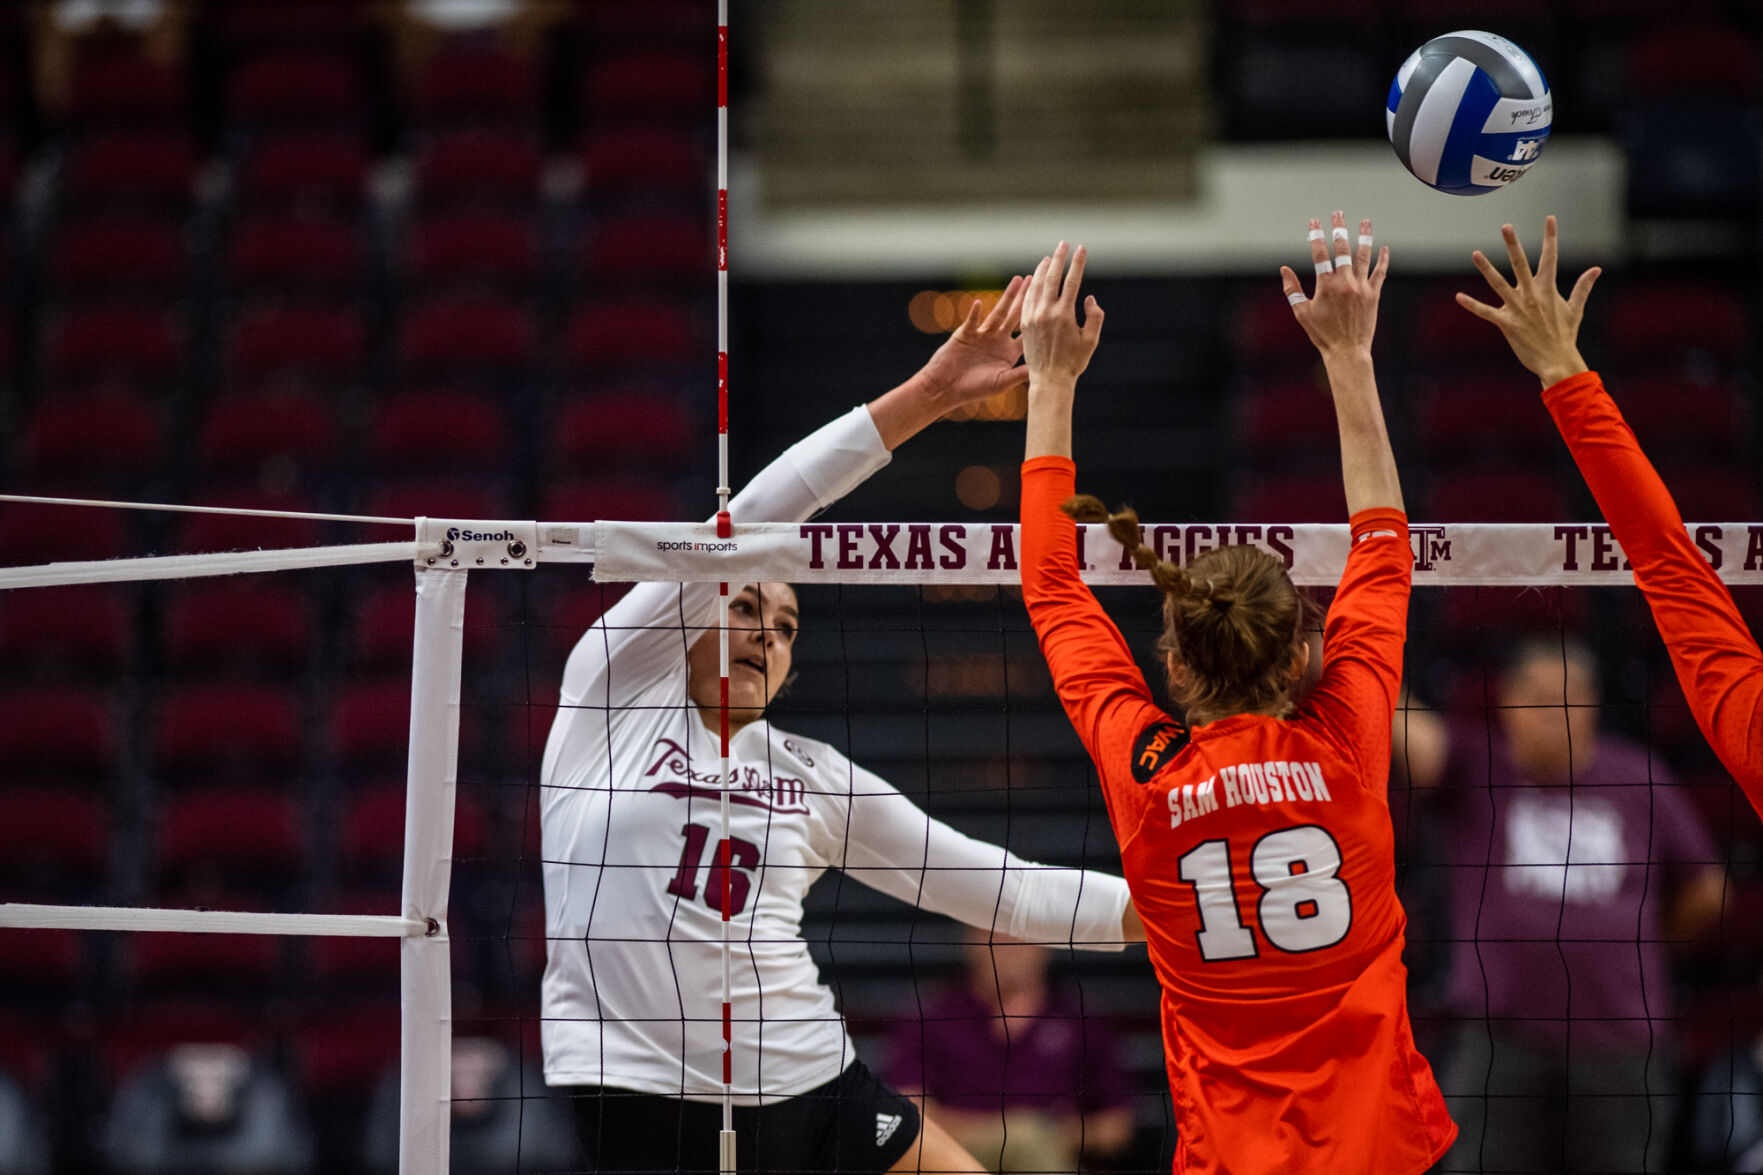 Outside hitter Caroline Meuth has rediscovered joy with Texas AandM volleyball program